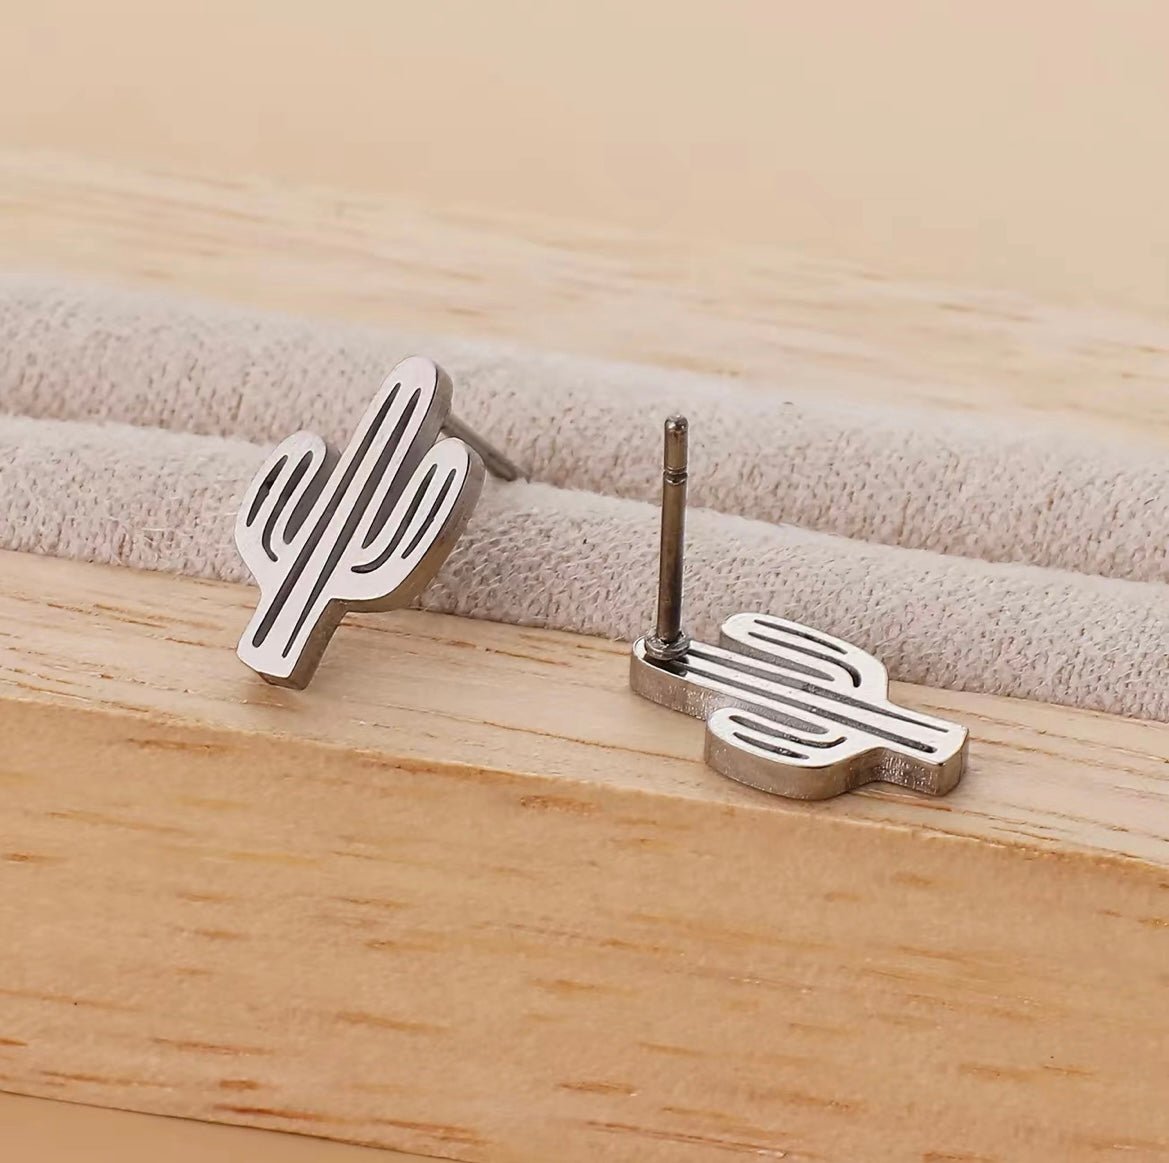 3pc Sterling Silver Cactus Gold, Silver, & Black Stud Earrings - A World With You Travel